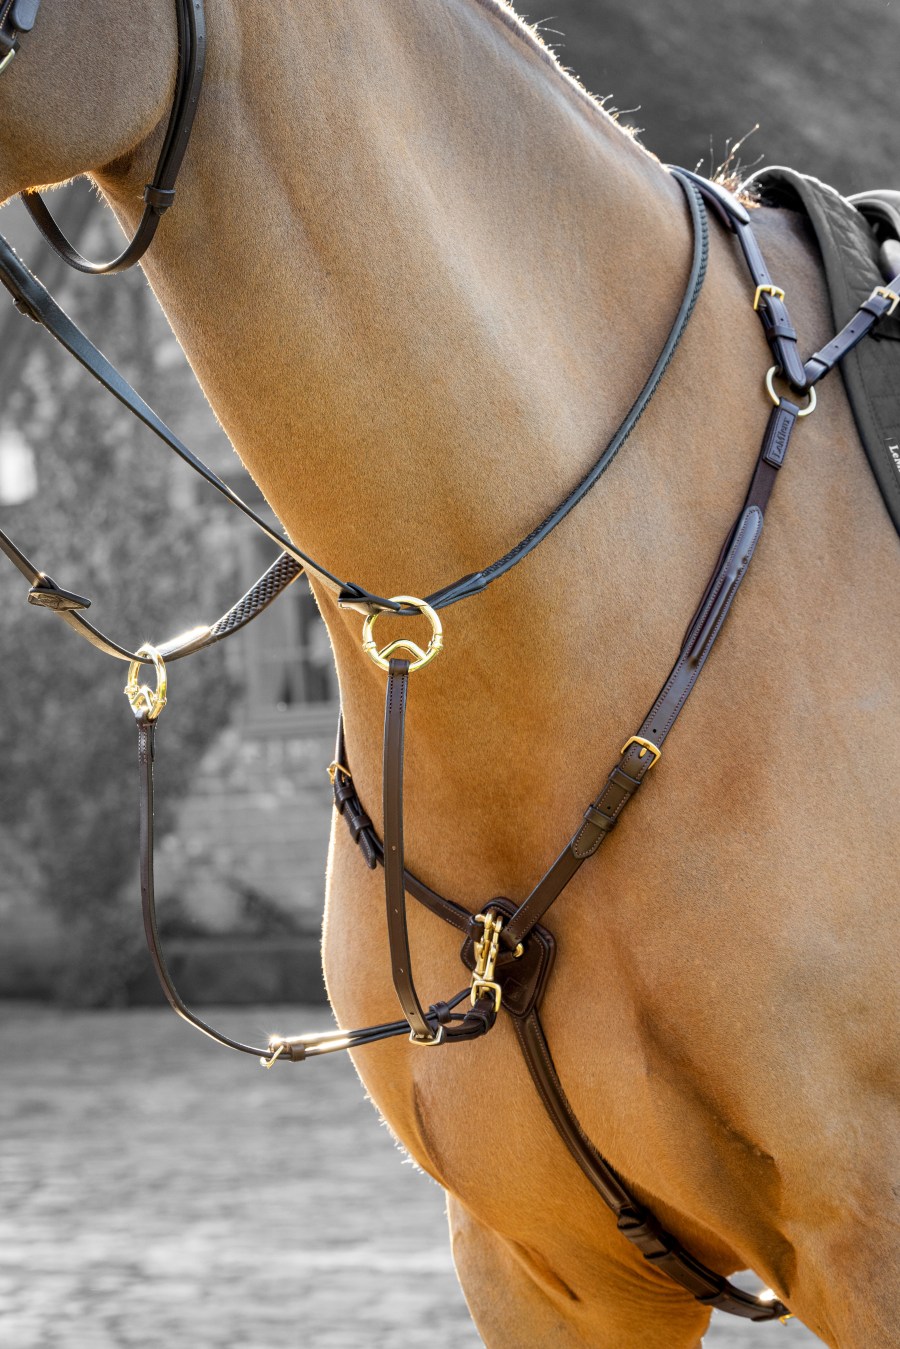 Le Mieux Breastplate with D-Ring Attachment